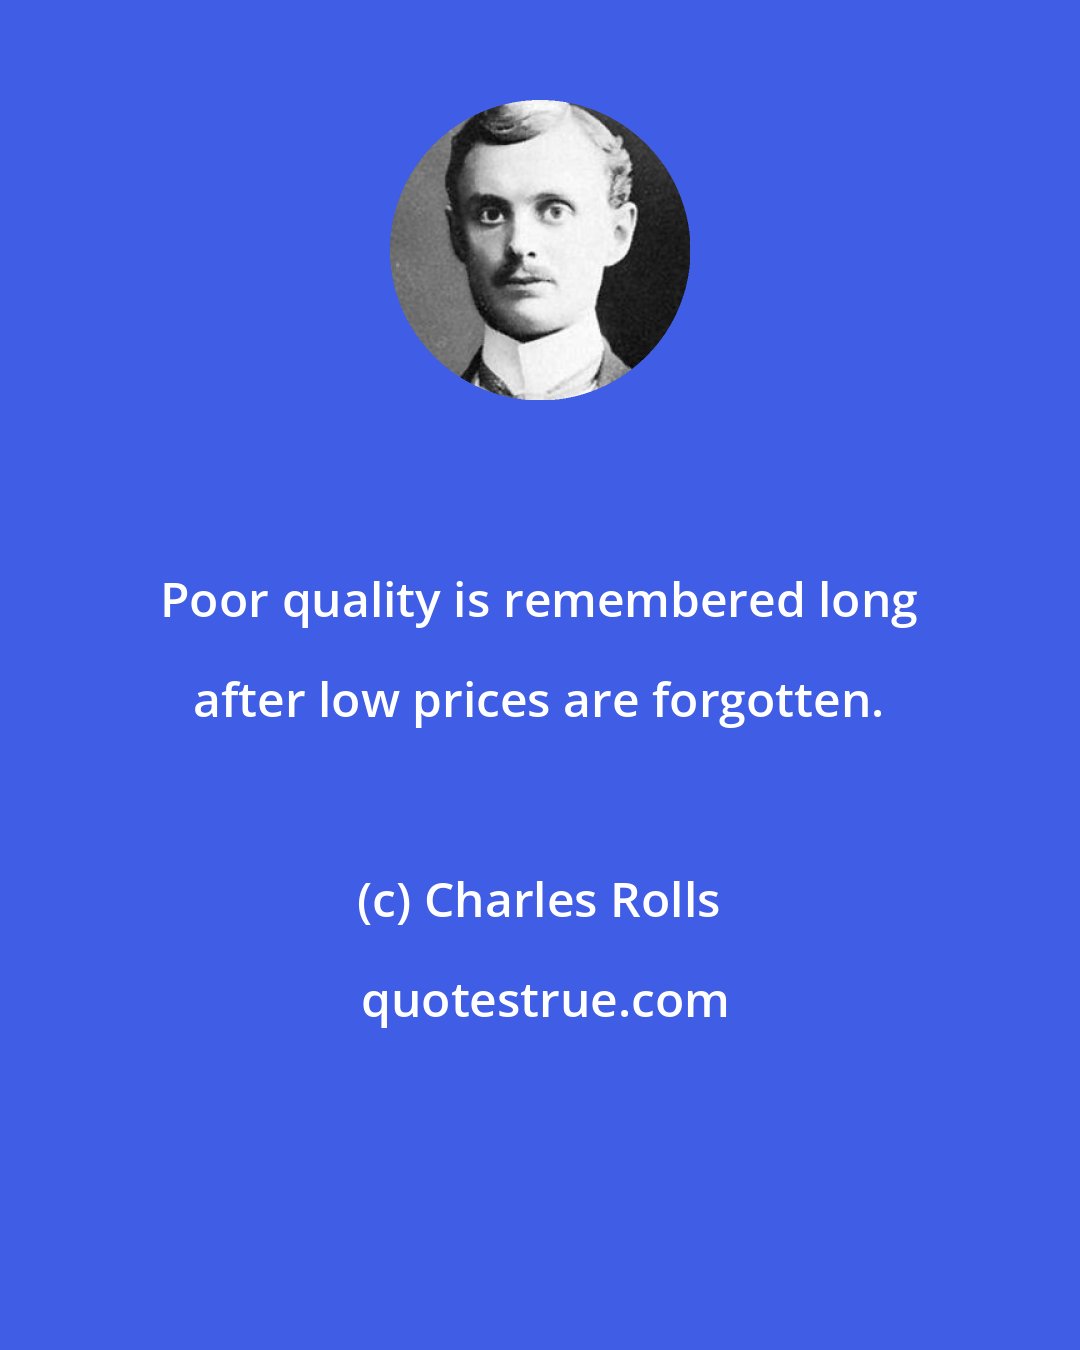 Charles Rolls: Poor quality is remembered long after low prices are forgotten.